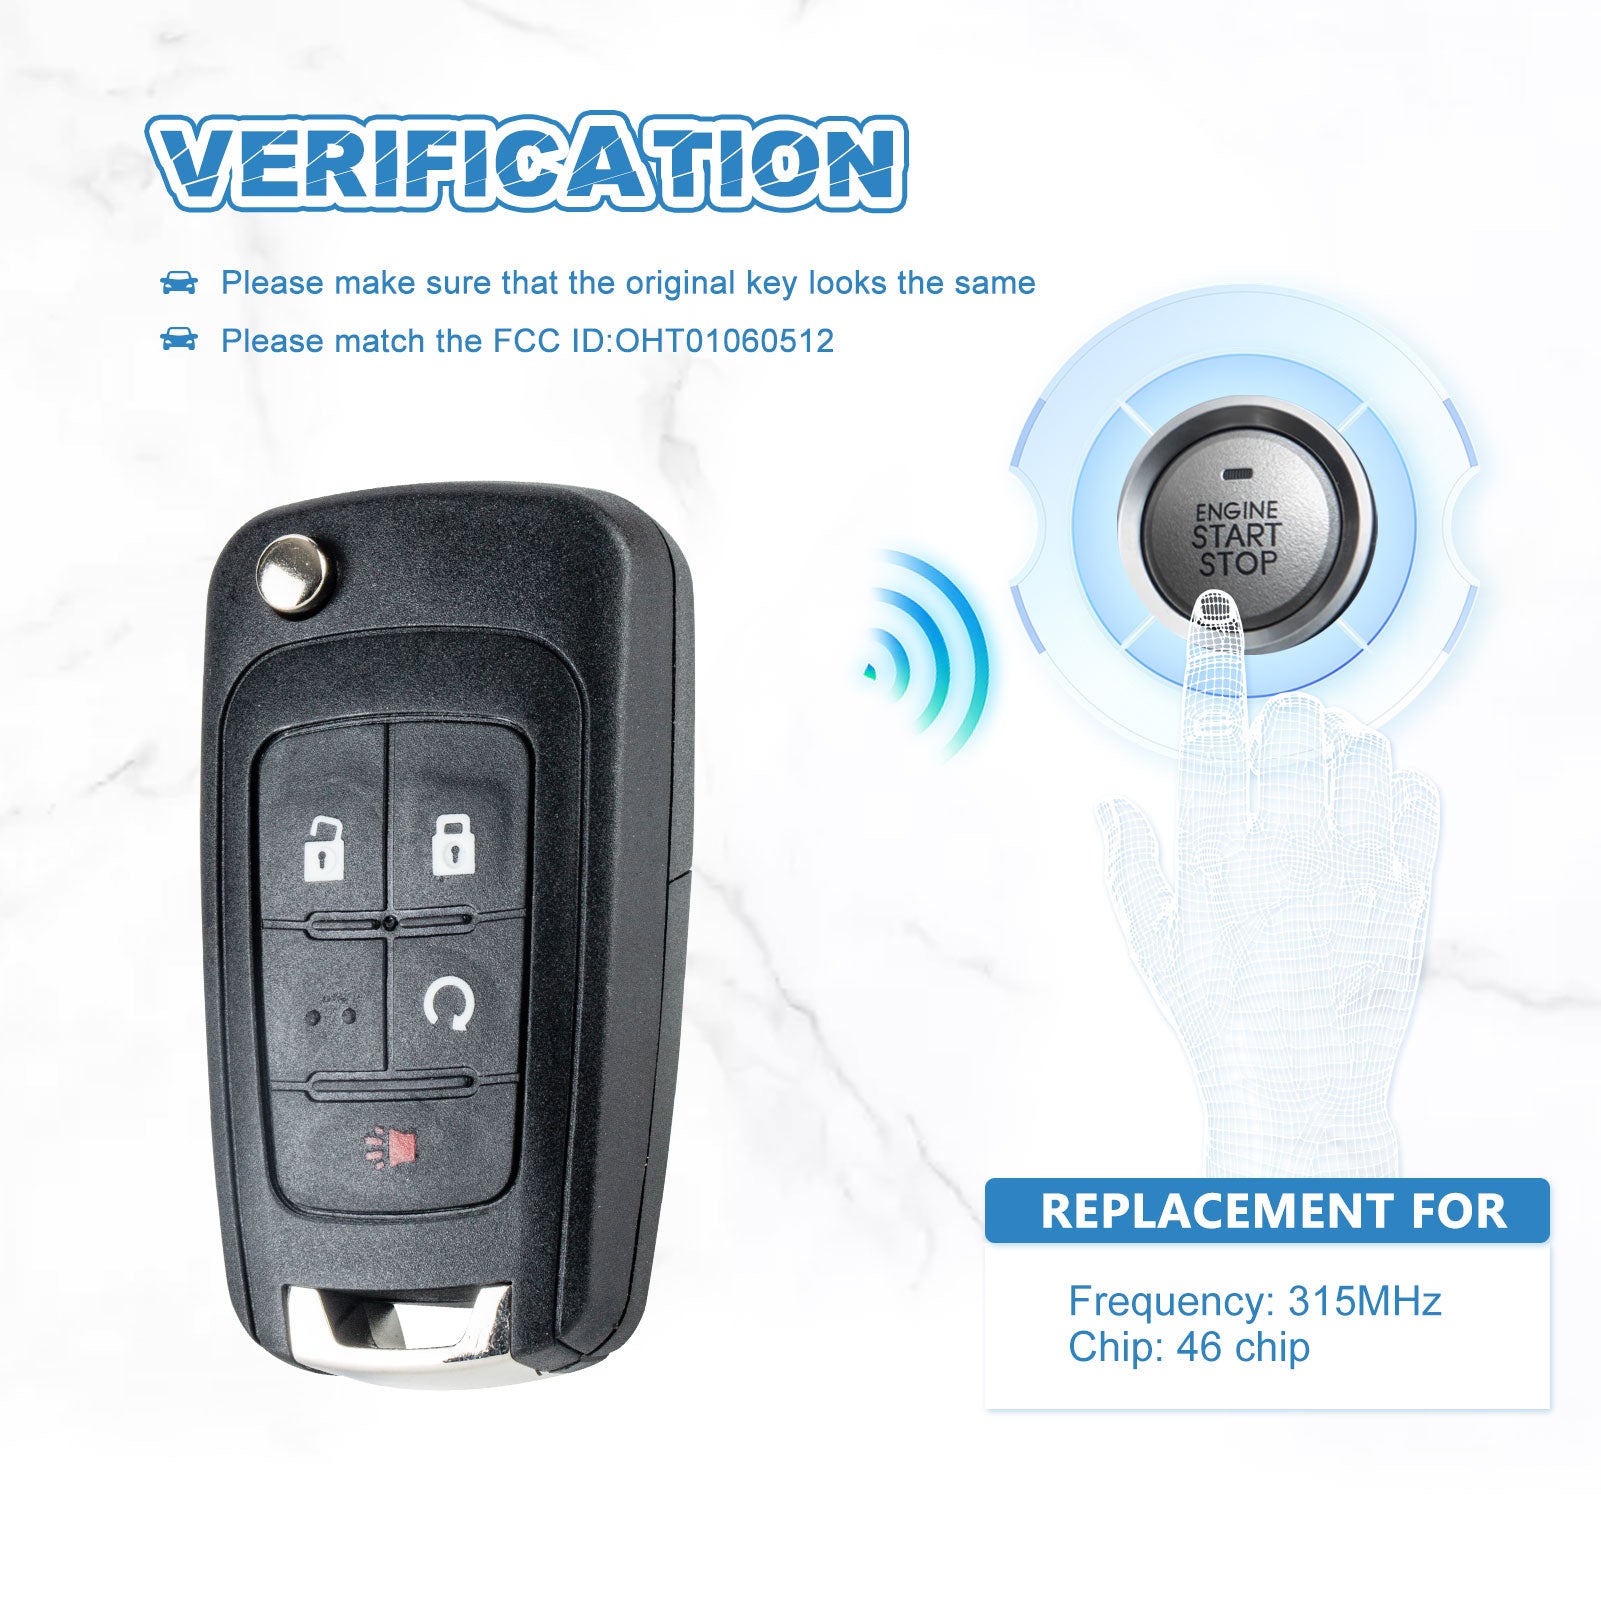 Car Key Fob Keyless Entry Remote Control 315MHZ Replacememnt for 2010-2019 Equinox 2014-2018 Buick Encore 2010-2019 GMC Terrain OHT01060512 KR-C4SC